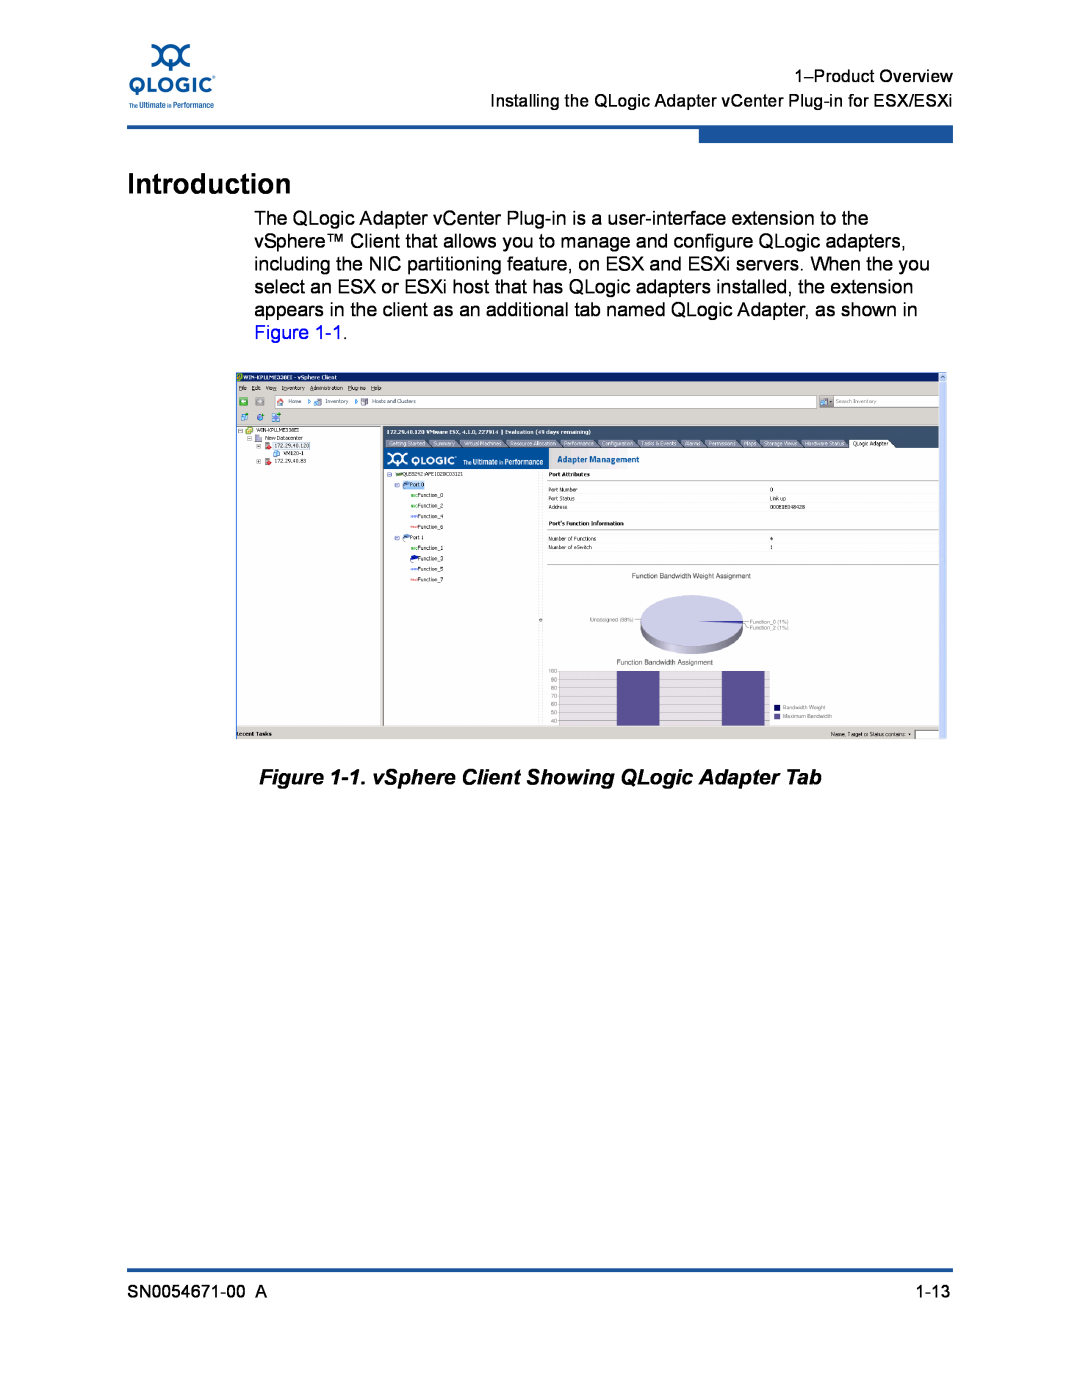 Q-Logic 3200, 8200 manual Introduction, 1. vSphere Client Showing QLogic Adapter Tab 